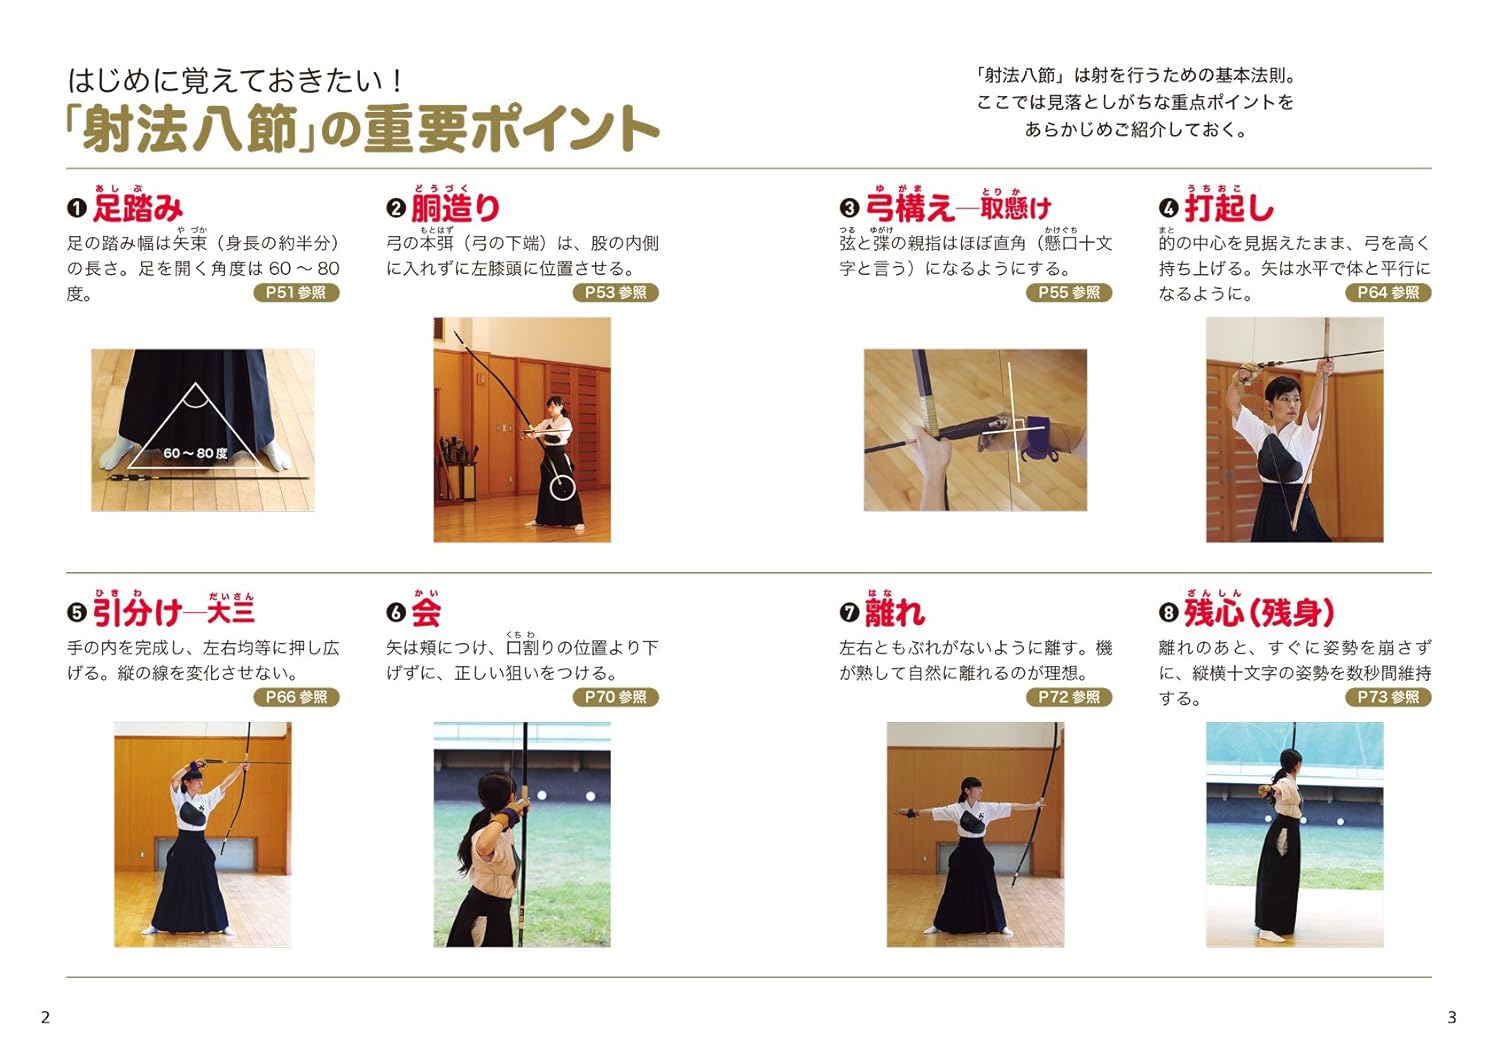 First Kyudo: Learn Beautiful Movements. Train Your Mind & Body to Stay Healthy Book by Makinori Matsuo